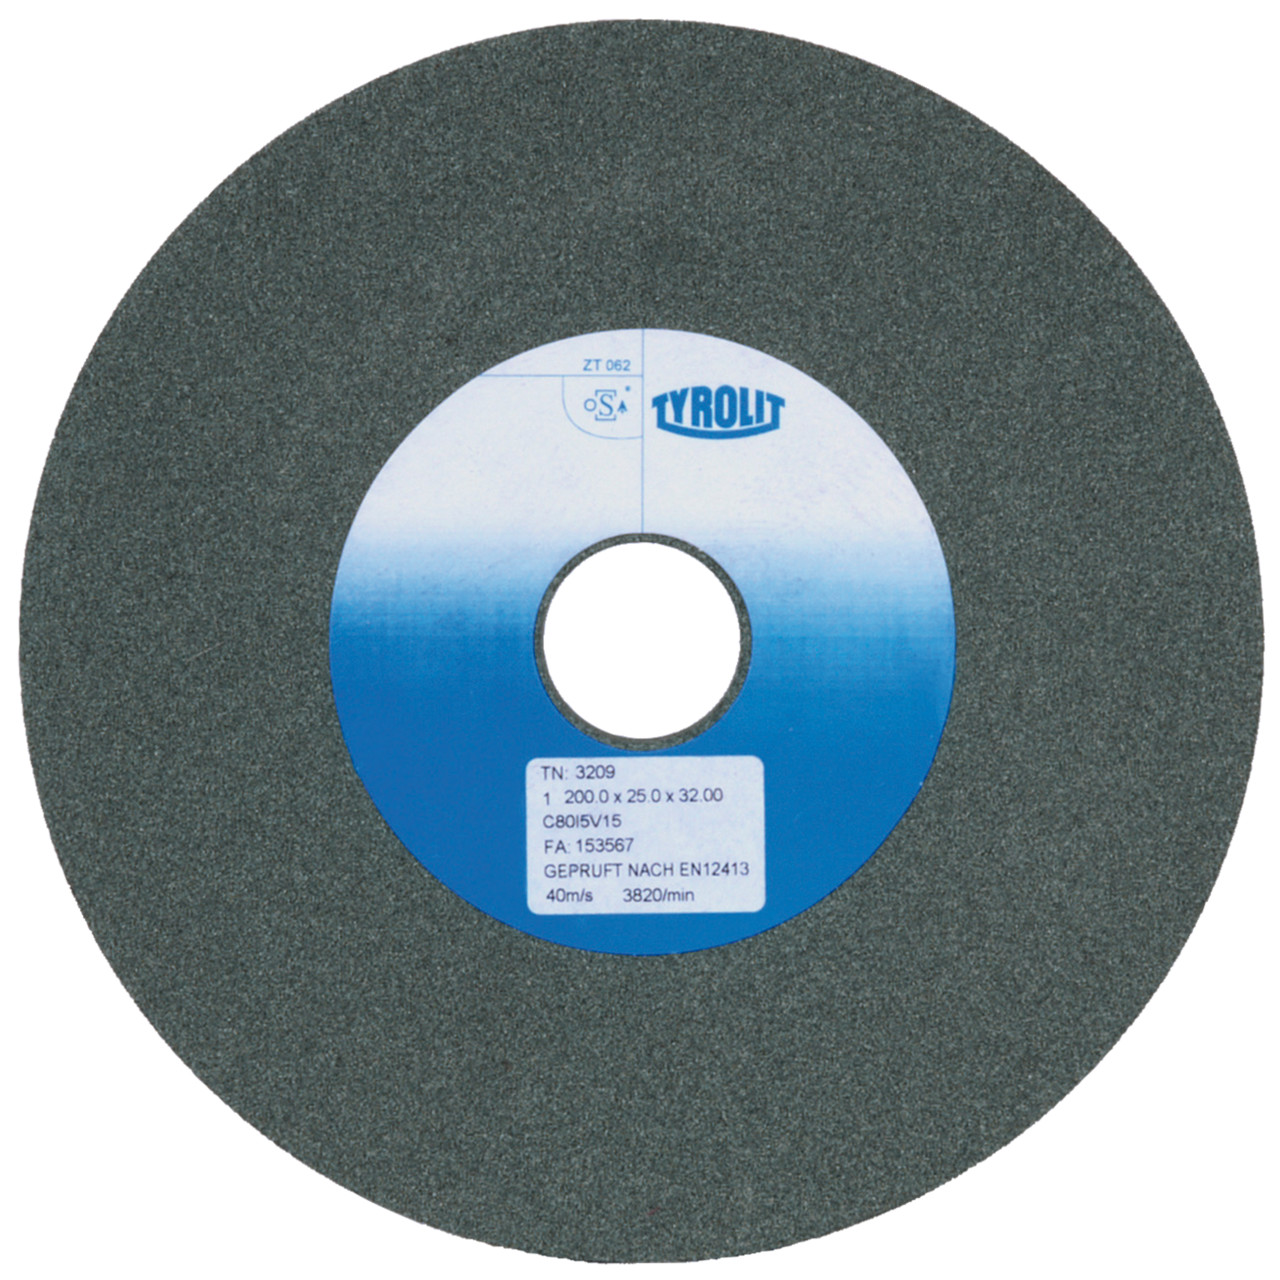 Tyrolit Rotary dressing DxDxH 250x12x51 Dressing discs for diamond and CBN grinding wheels, shape: 1, Art. 413027